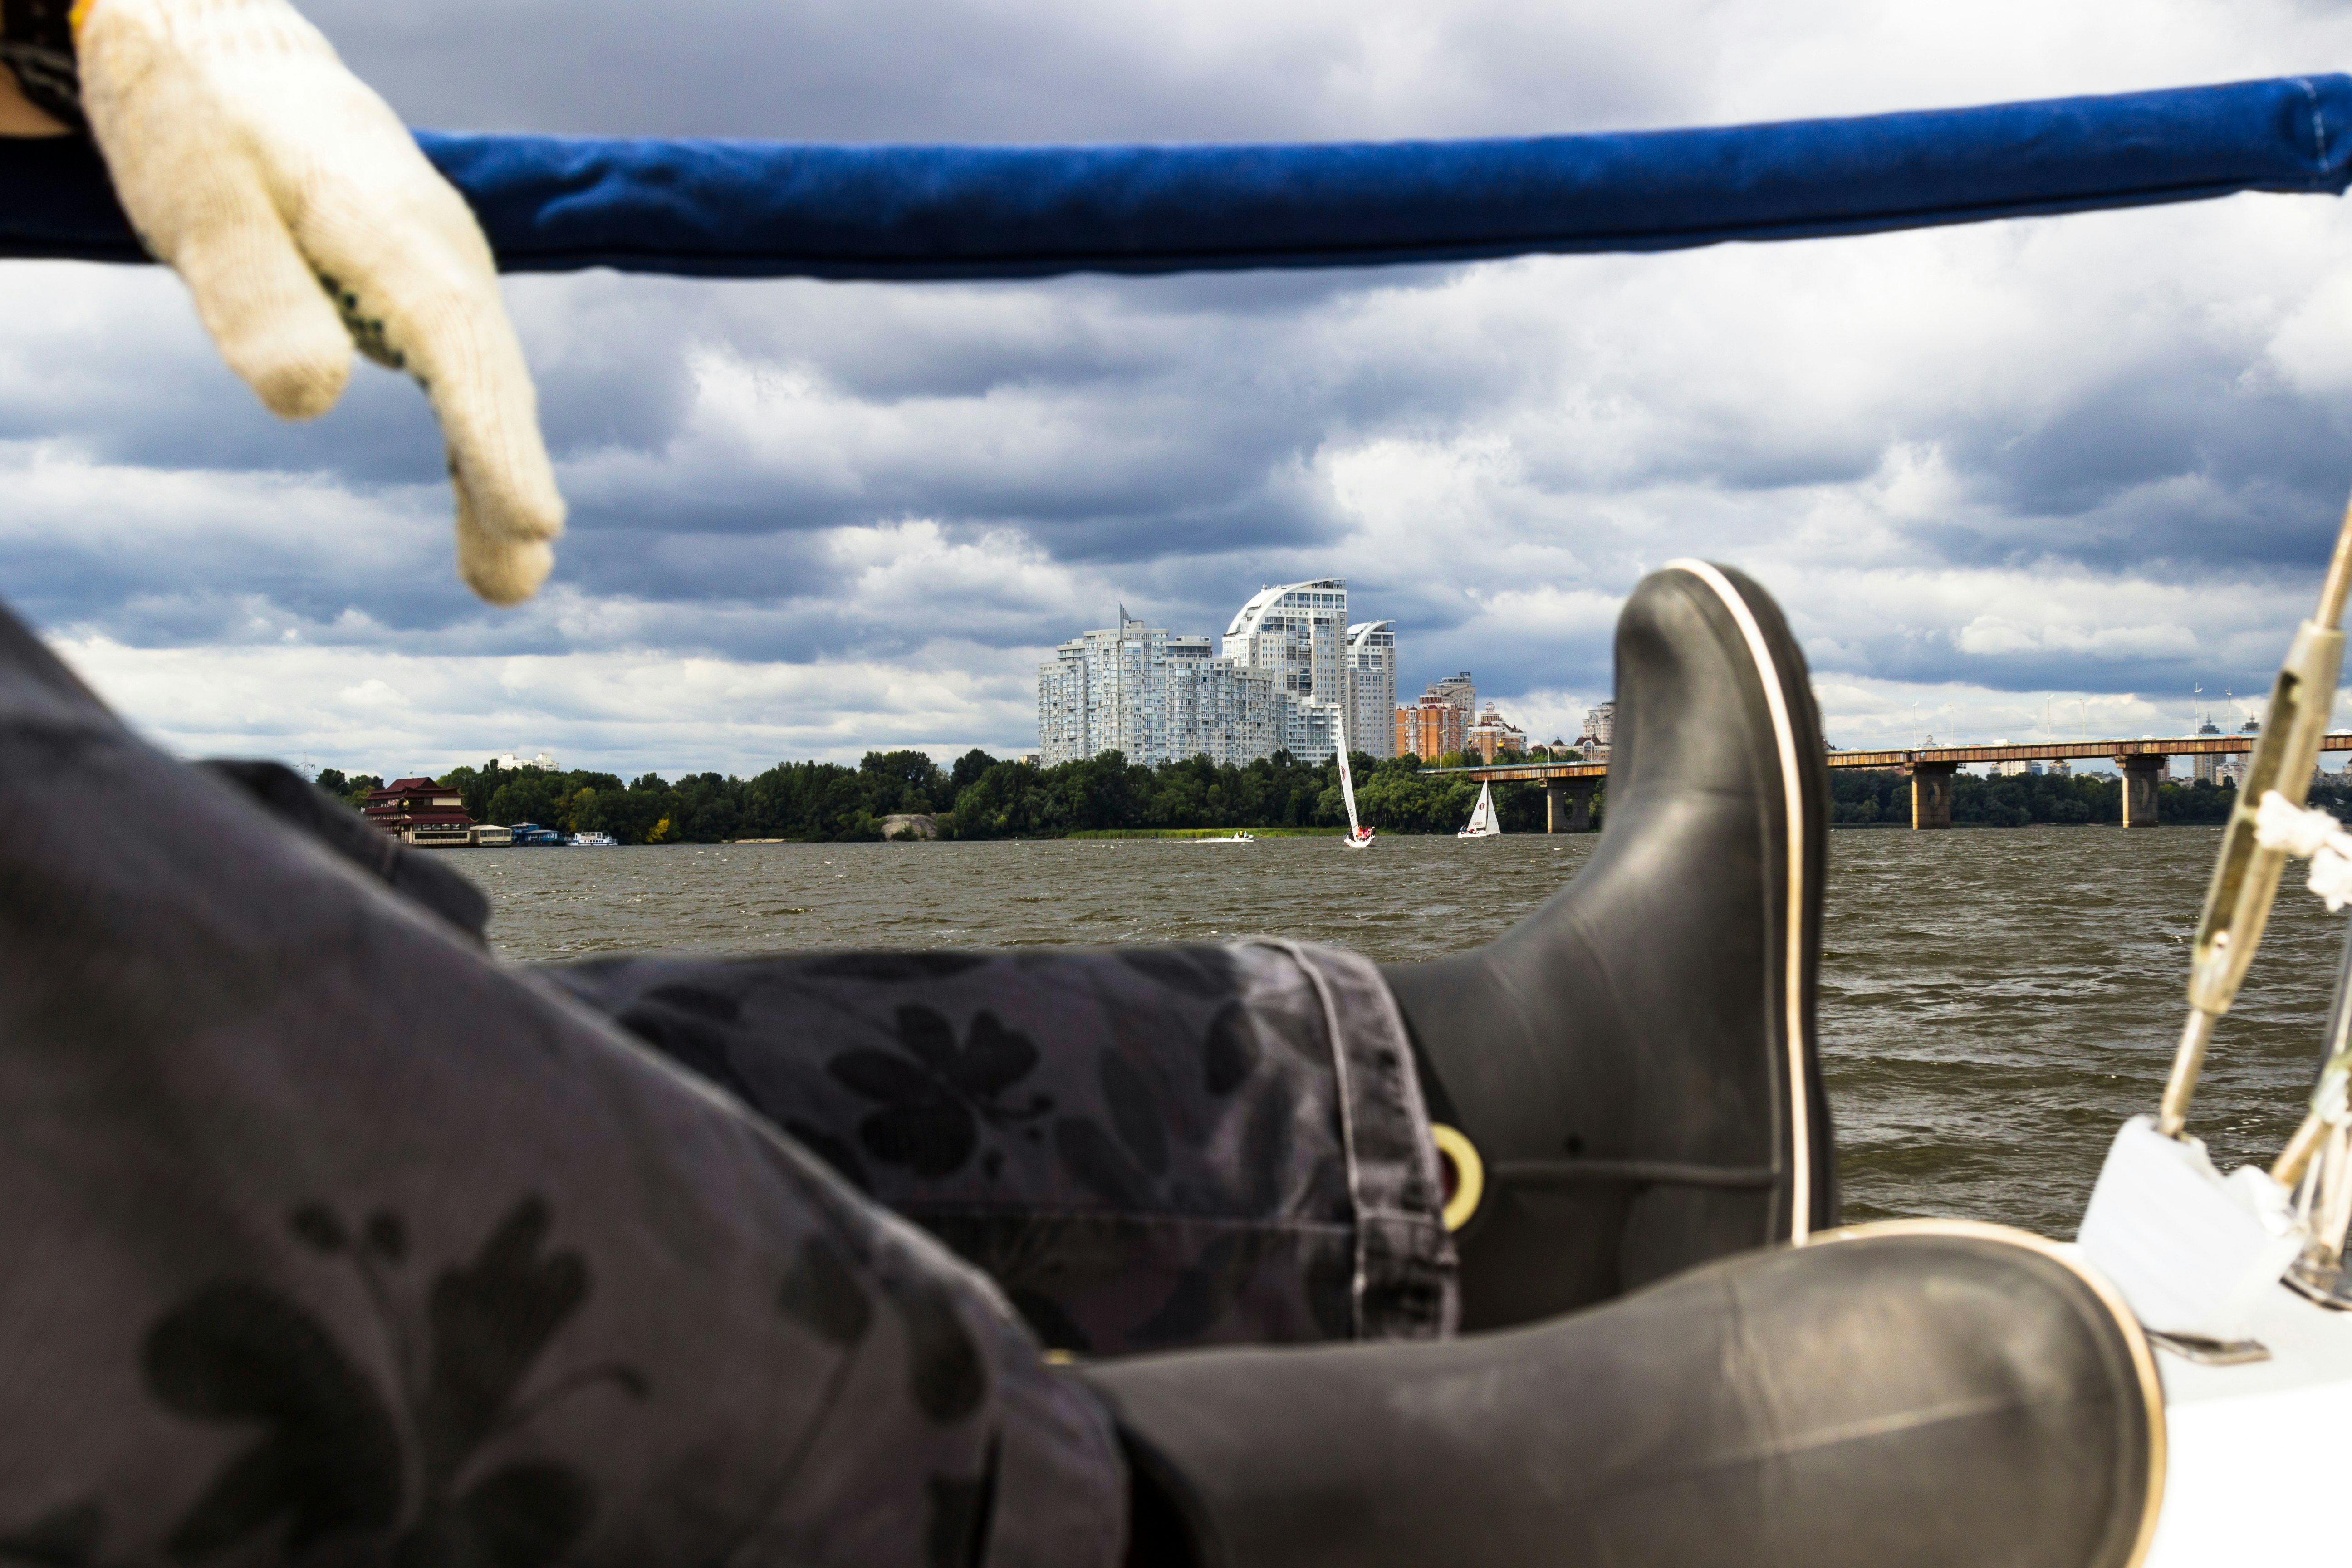 Feet in black boots aboard a yacht. Ahead is the riverbank with a cityscape. Part of the frame